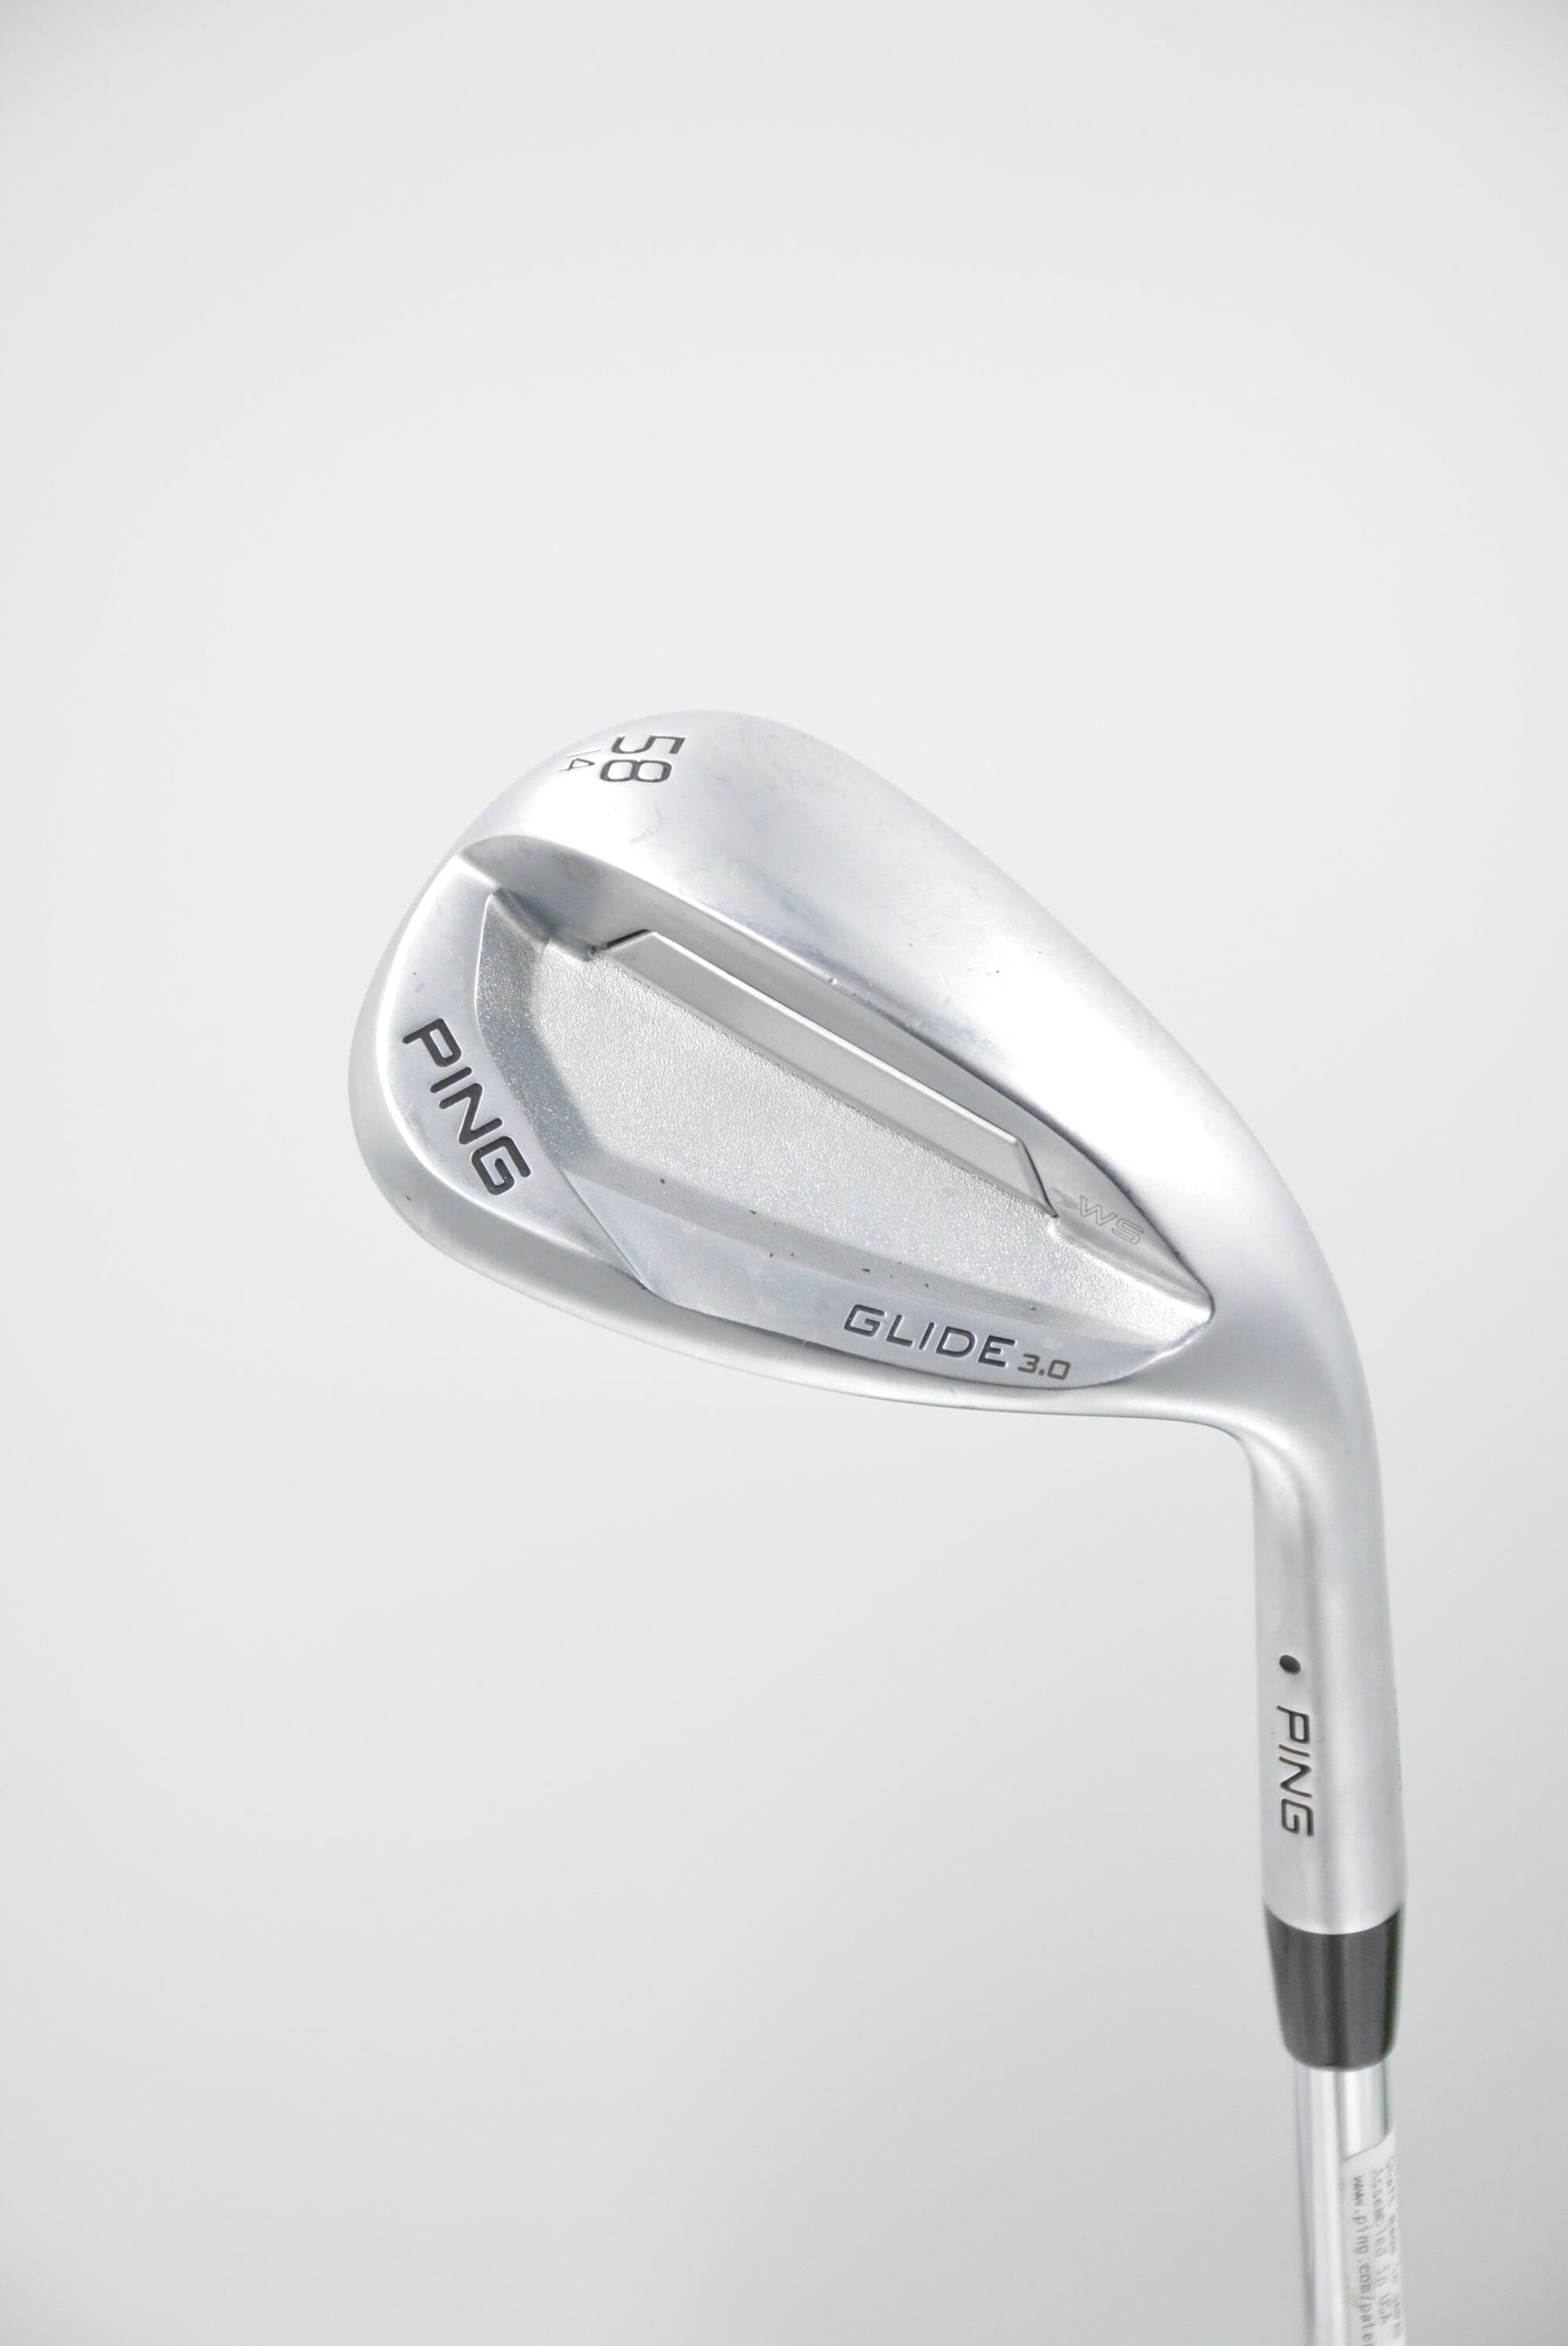 Ping Glide 3.0 WS 58 Degree Wedge Wedge Flex Golf Clubs GolfRoots 